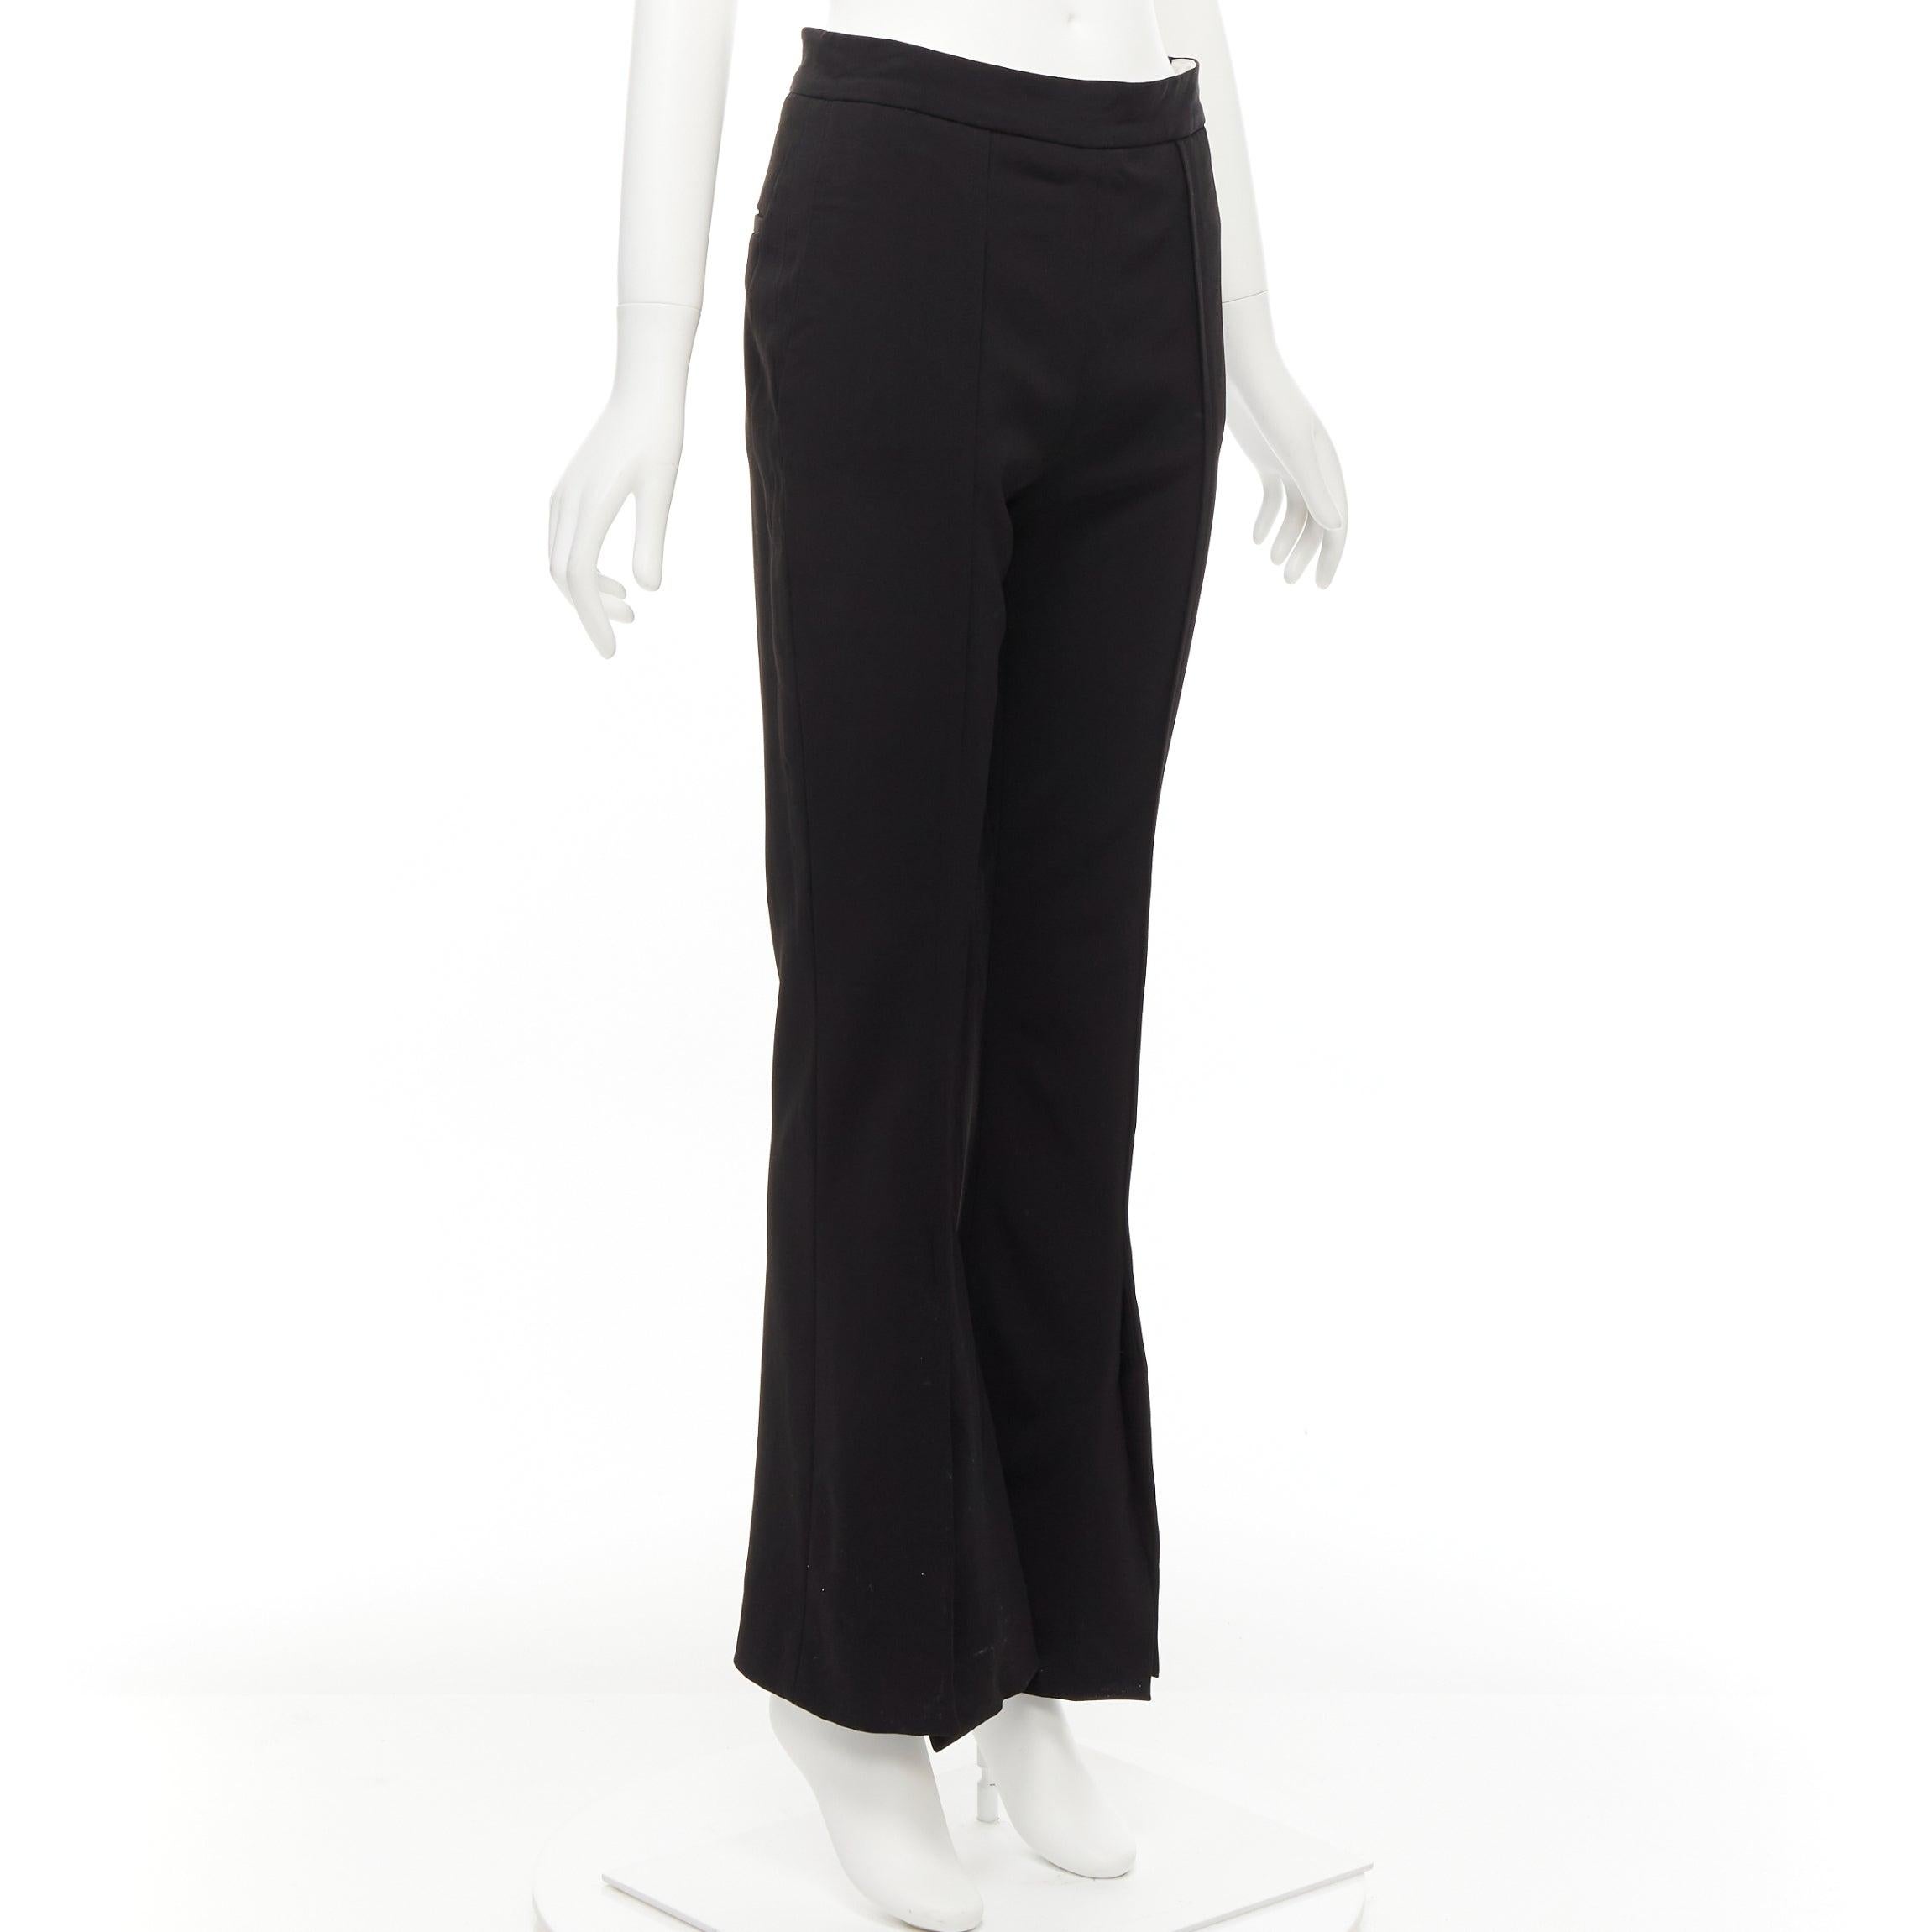 MARNI black front pleat slit hem minimal side zip flare trousers IT42 M
Reference: CELG/A00256
Brand: Marni
Material: Viscose, Blend
Color: Black, Gold
Pattern: Solid
Closure: Zip
Extra Details: Side gold zip.
Made in: Italy

CONDITION:
Condition: